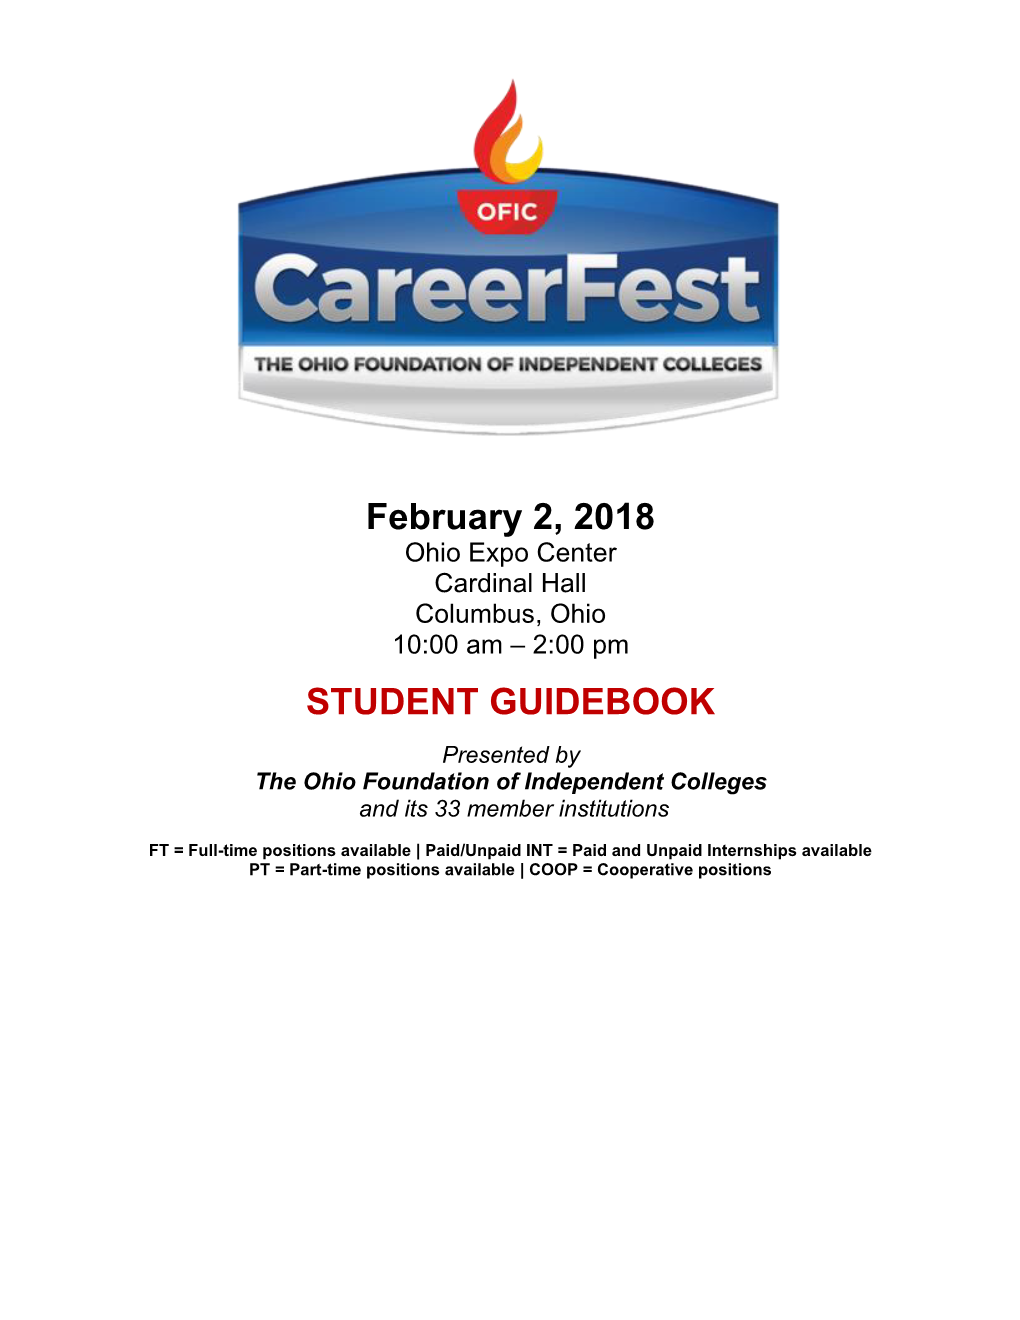 February 2, 2018 STUDENT GUIDEBOOK